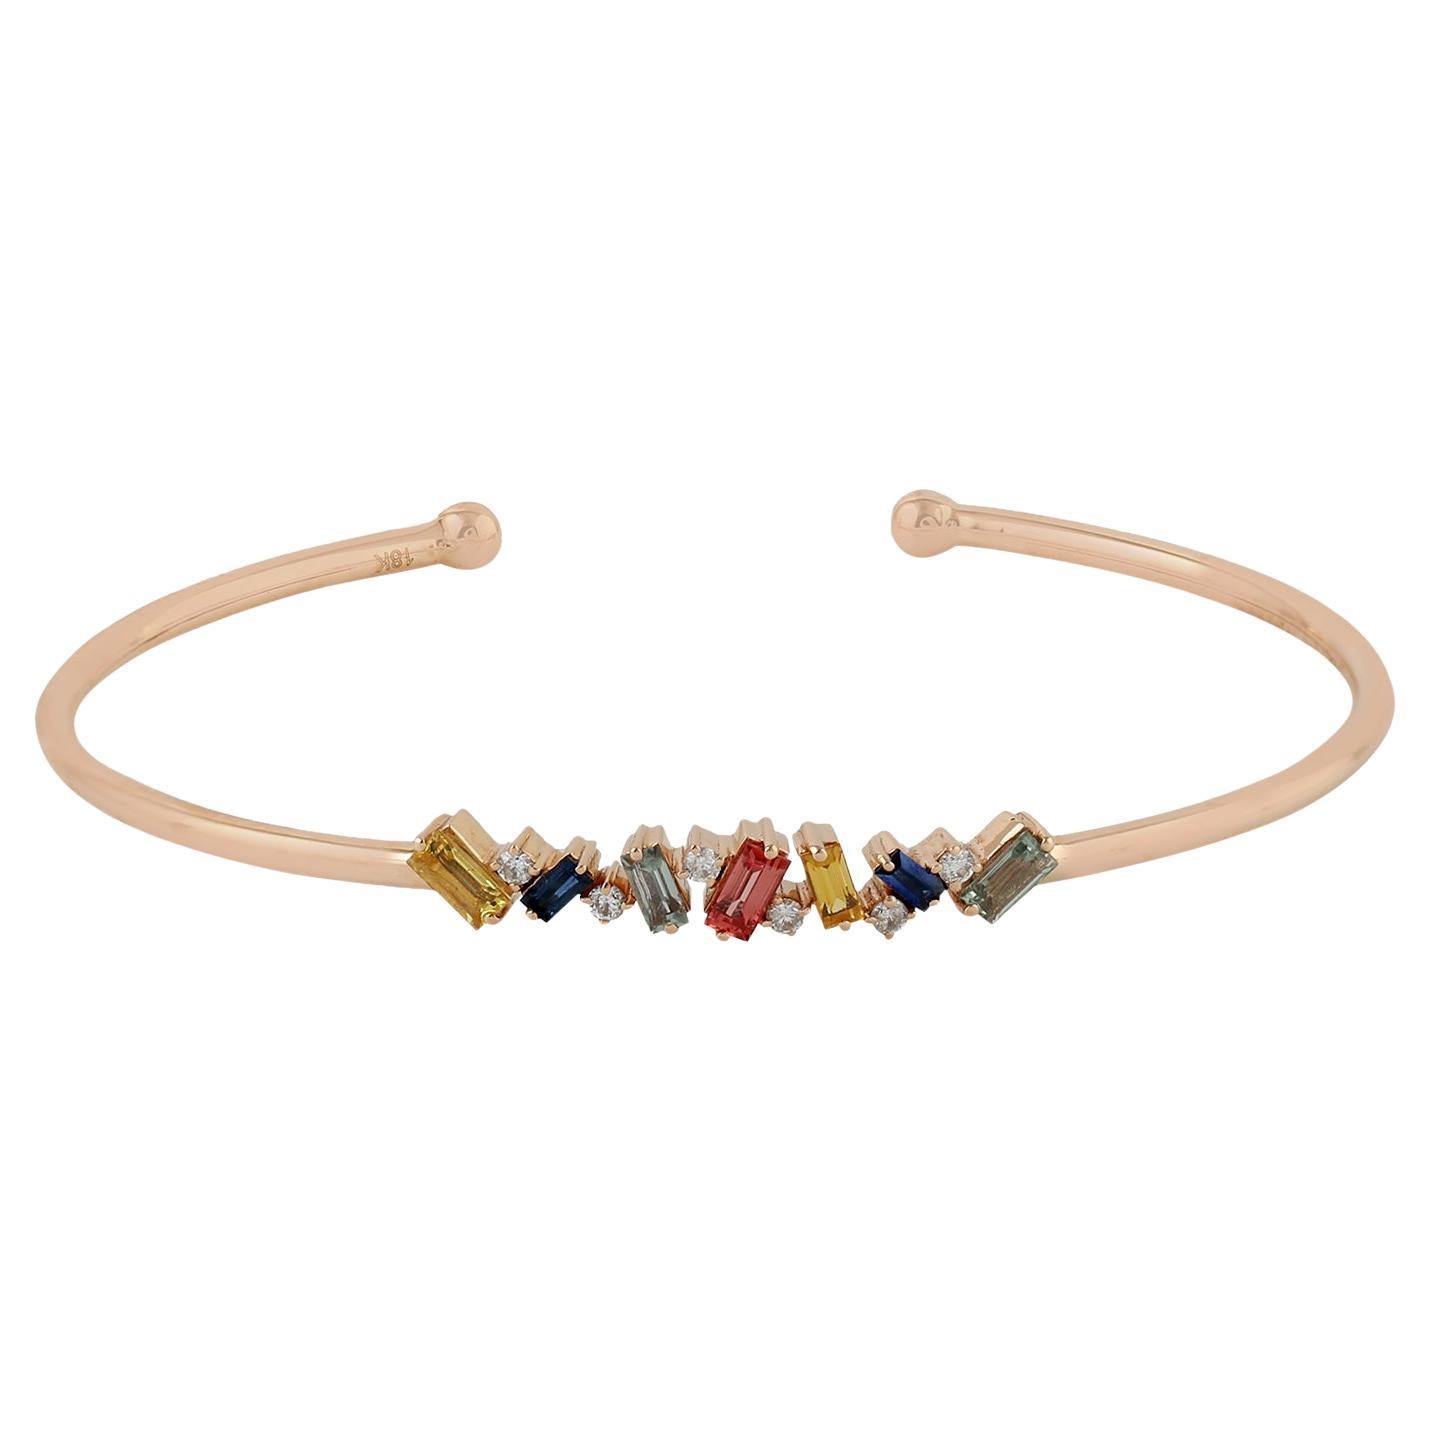 Rainbow Sapphire Baguette Bracelet With Diamonds Made In 18K Rose Gold For Sale